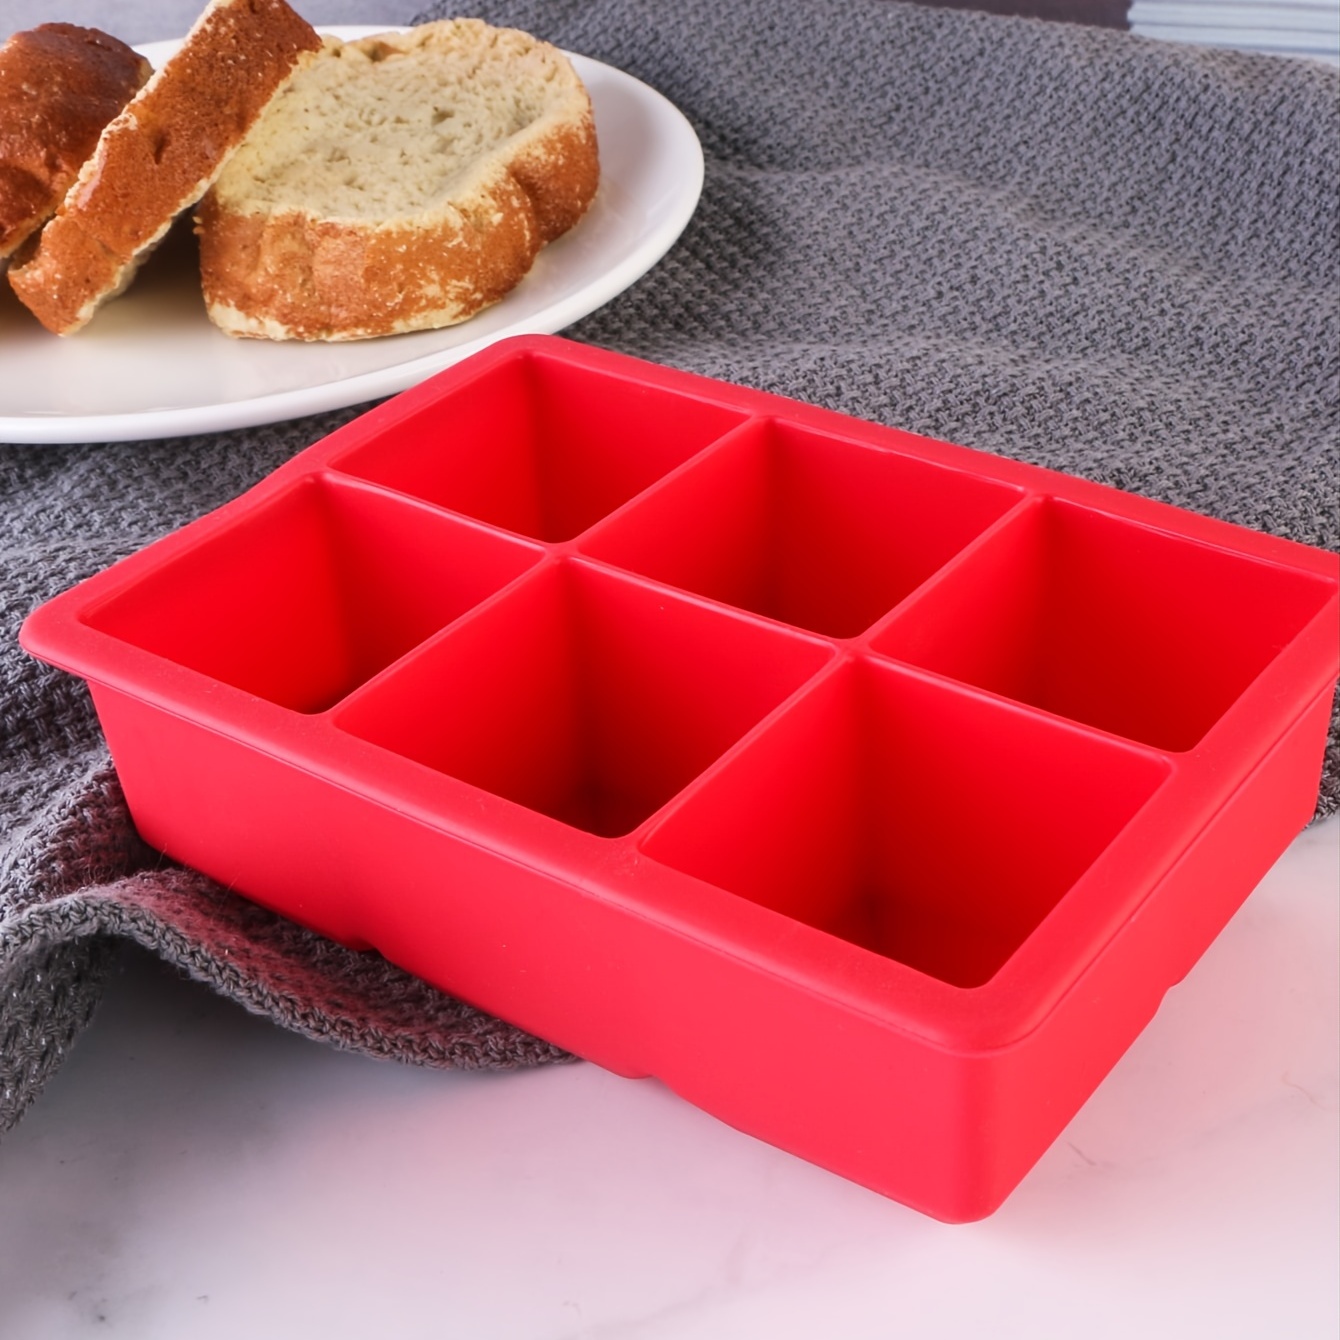 Whiskey Ice Cube Maker Tray Mould 6 Girds Silicone Square Ice Mold Bar  Cocktail